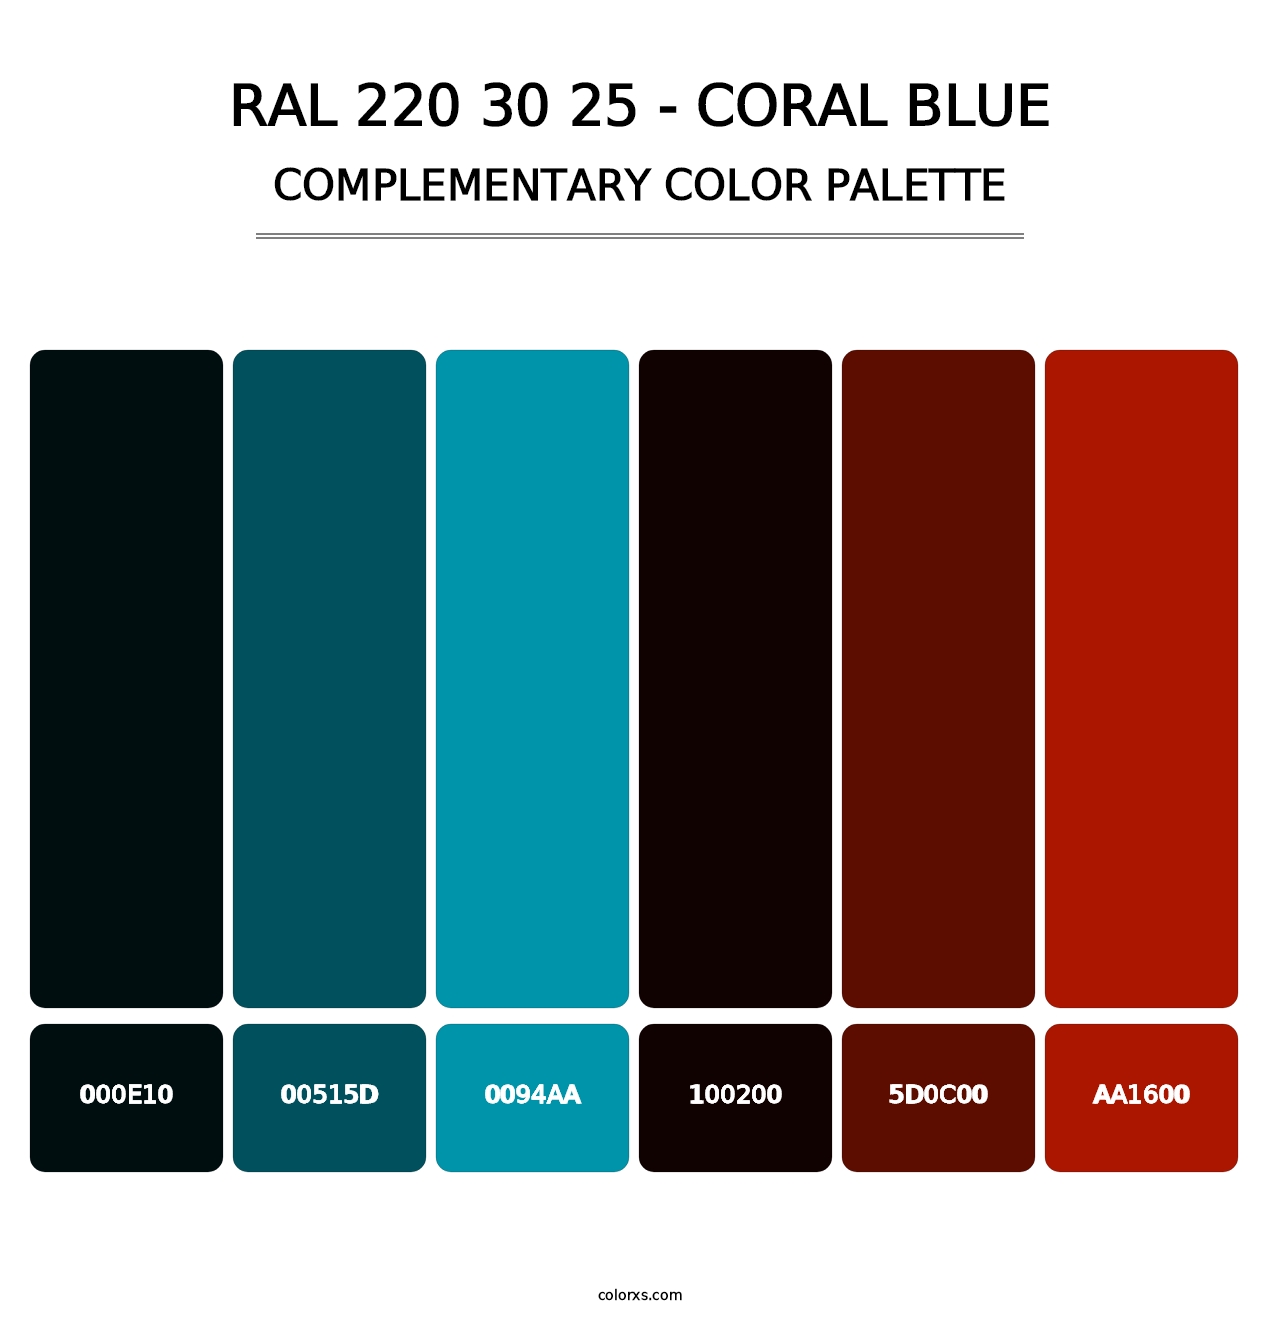 RAL 220 30 25 - Coral Blue - Complementary Color Palette